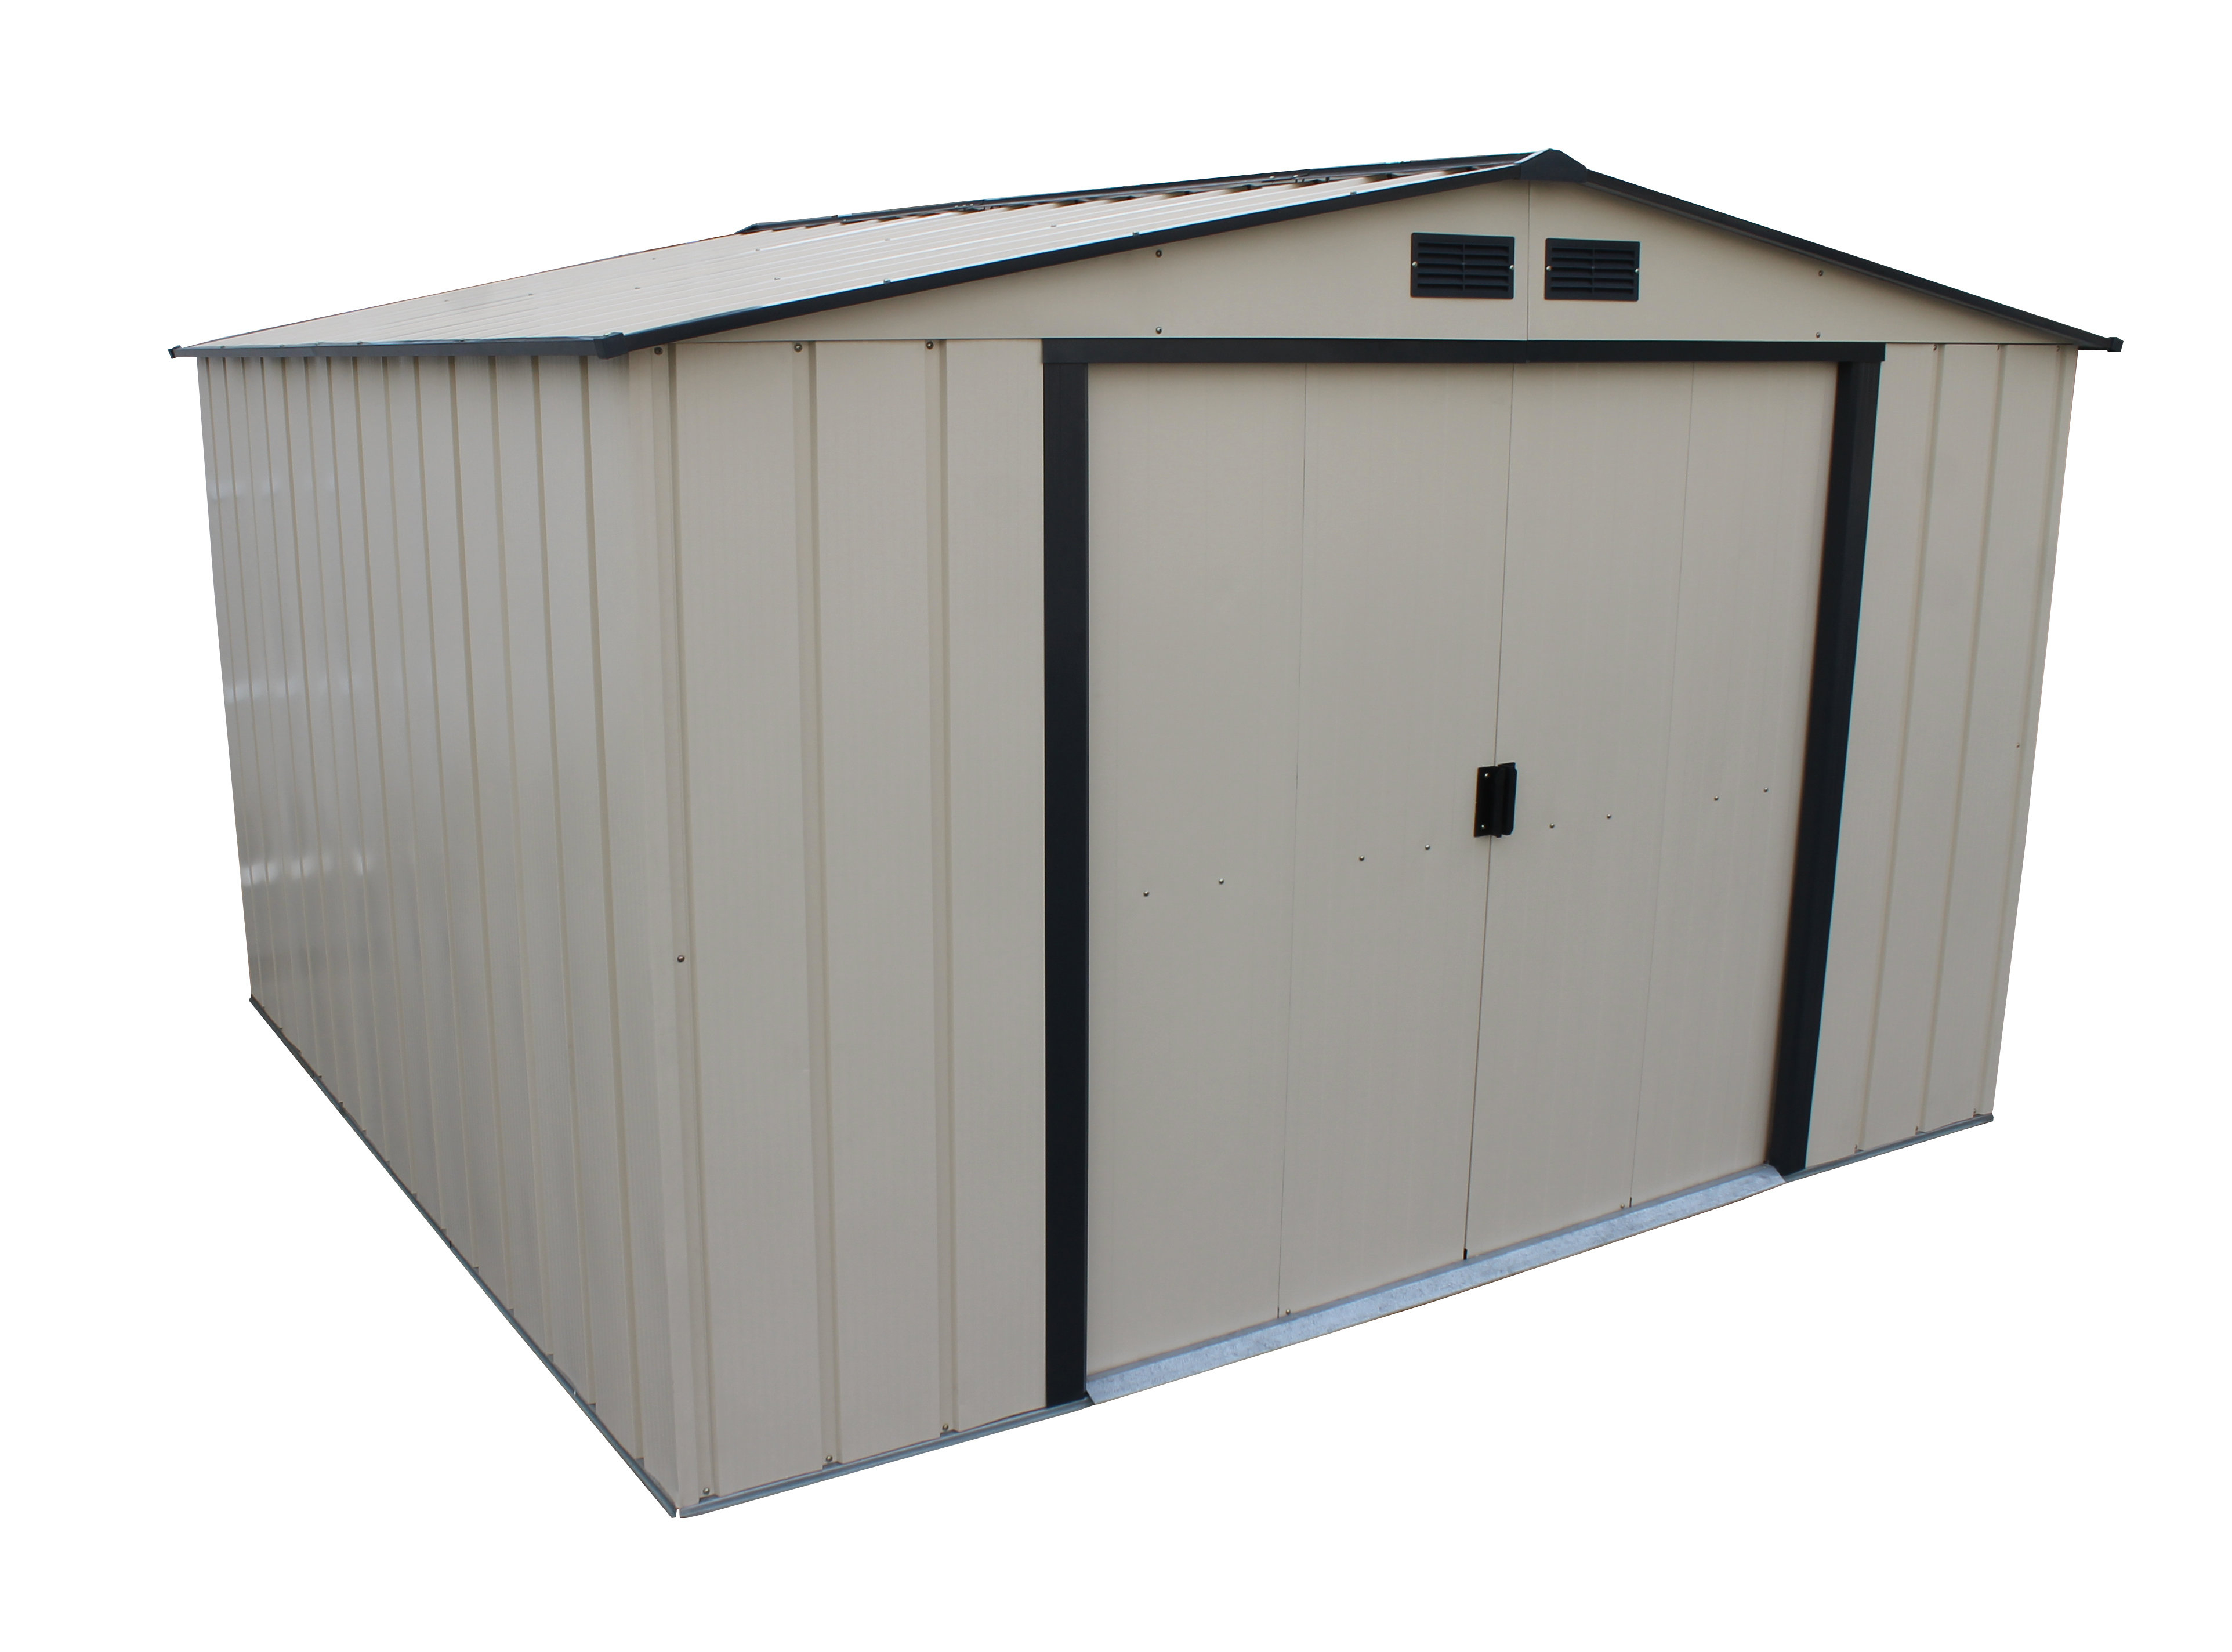 Decor Wonderful Outdoor Duramax Shed With Simple Mini Spaces in sizing 3848 X 2848